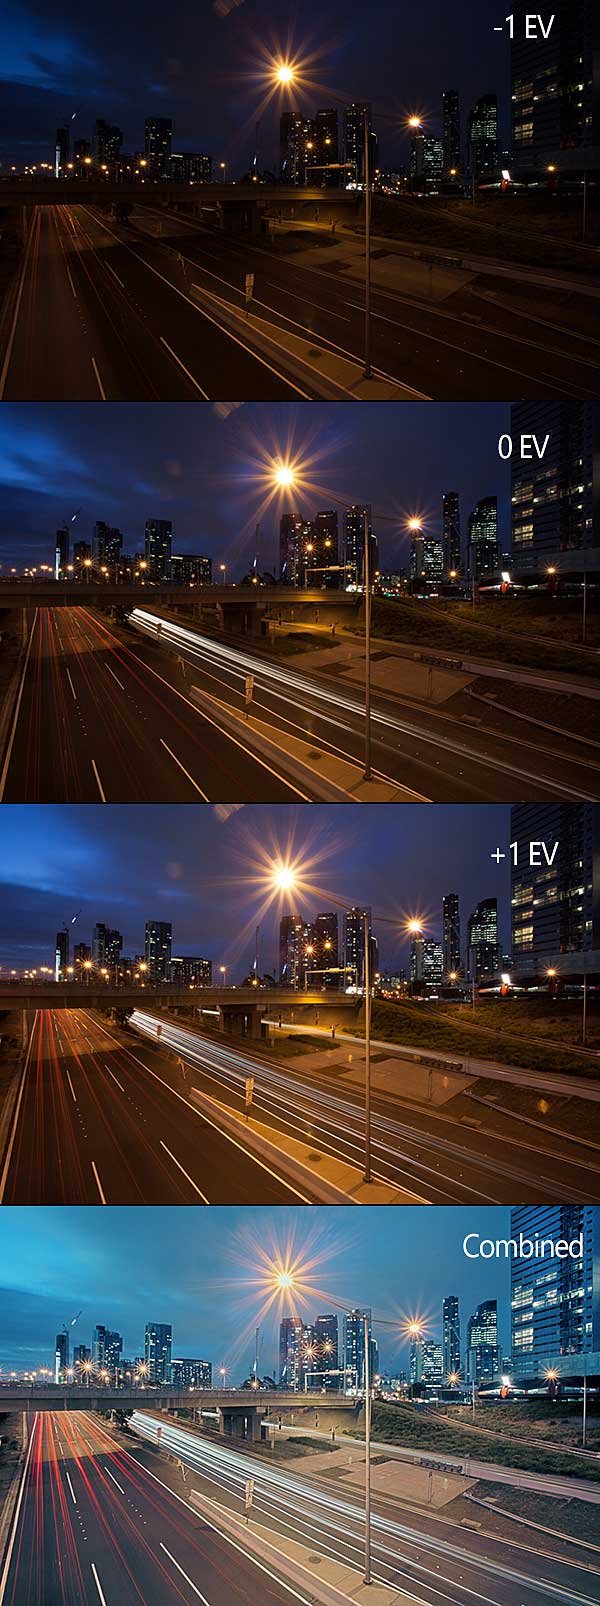 An under exposed (-1 EV), neutral exposed (0 EV), over exposed (+1 EV) and final image with all exposures combined